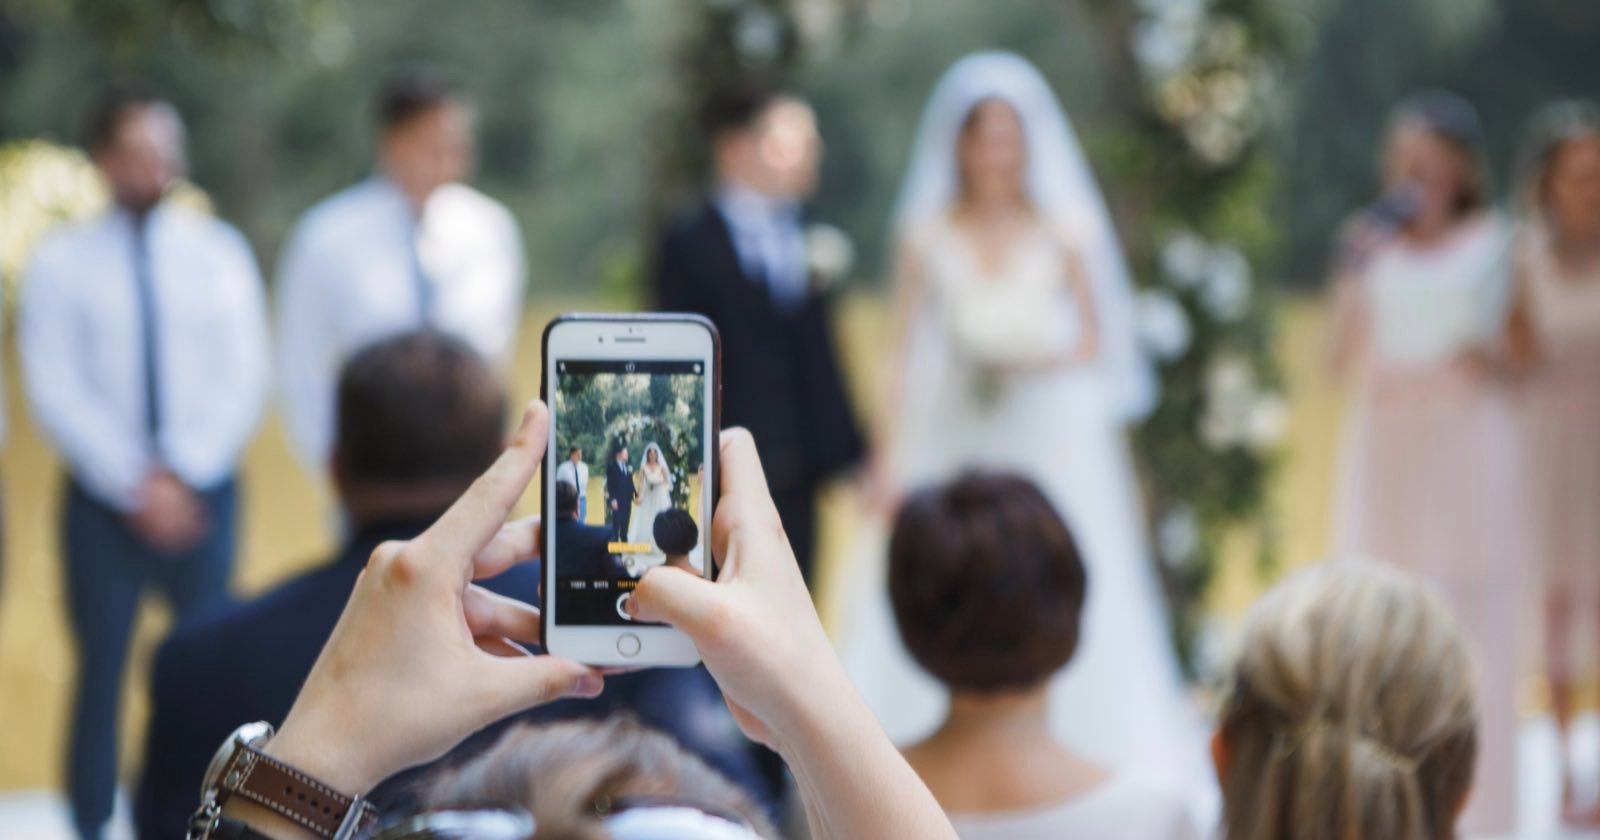 Wedding Photographer is Praised For Stopping Guest Taking Pictures on Phone